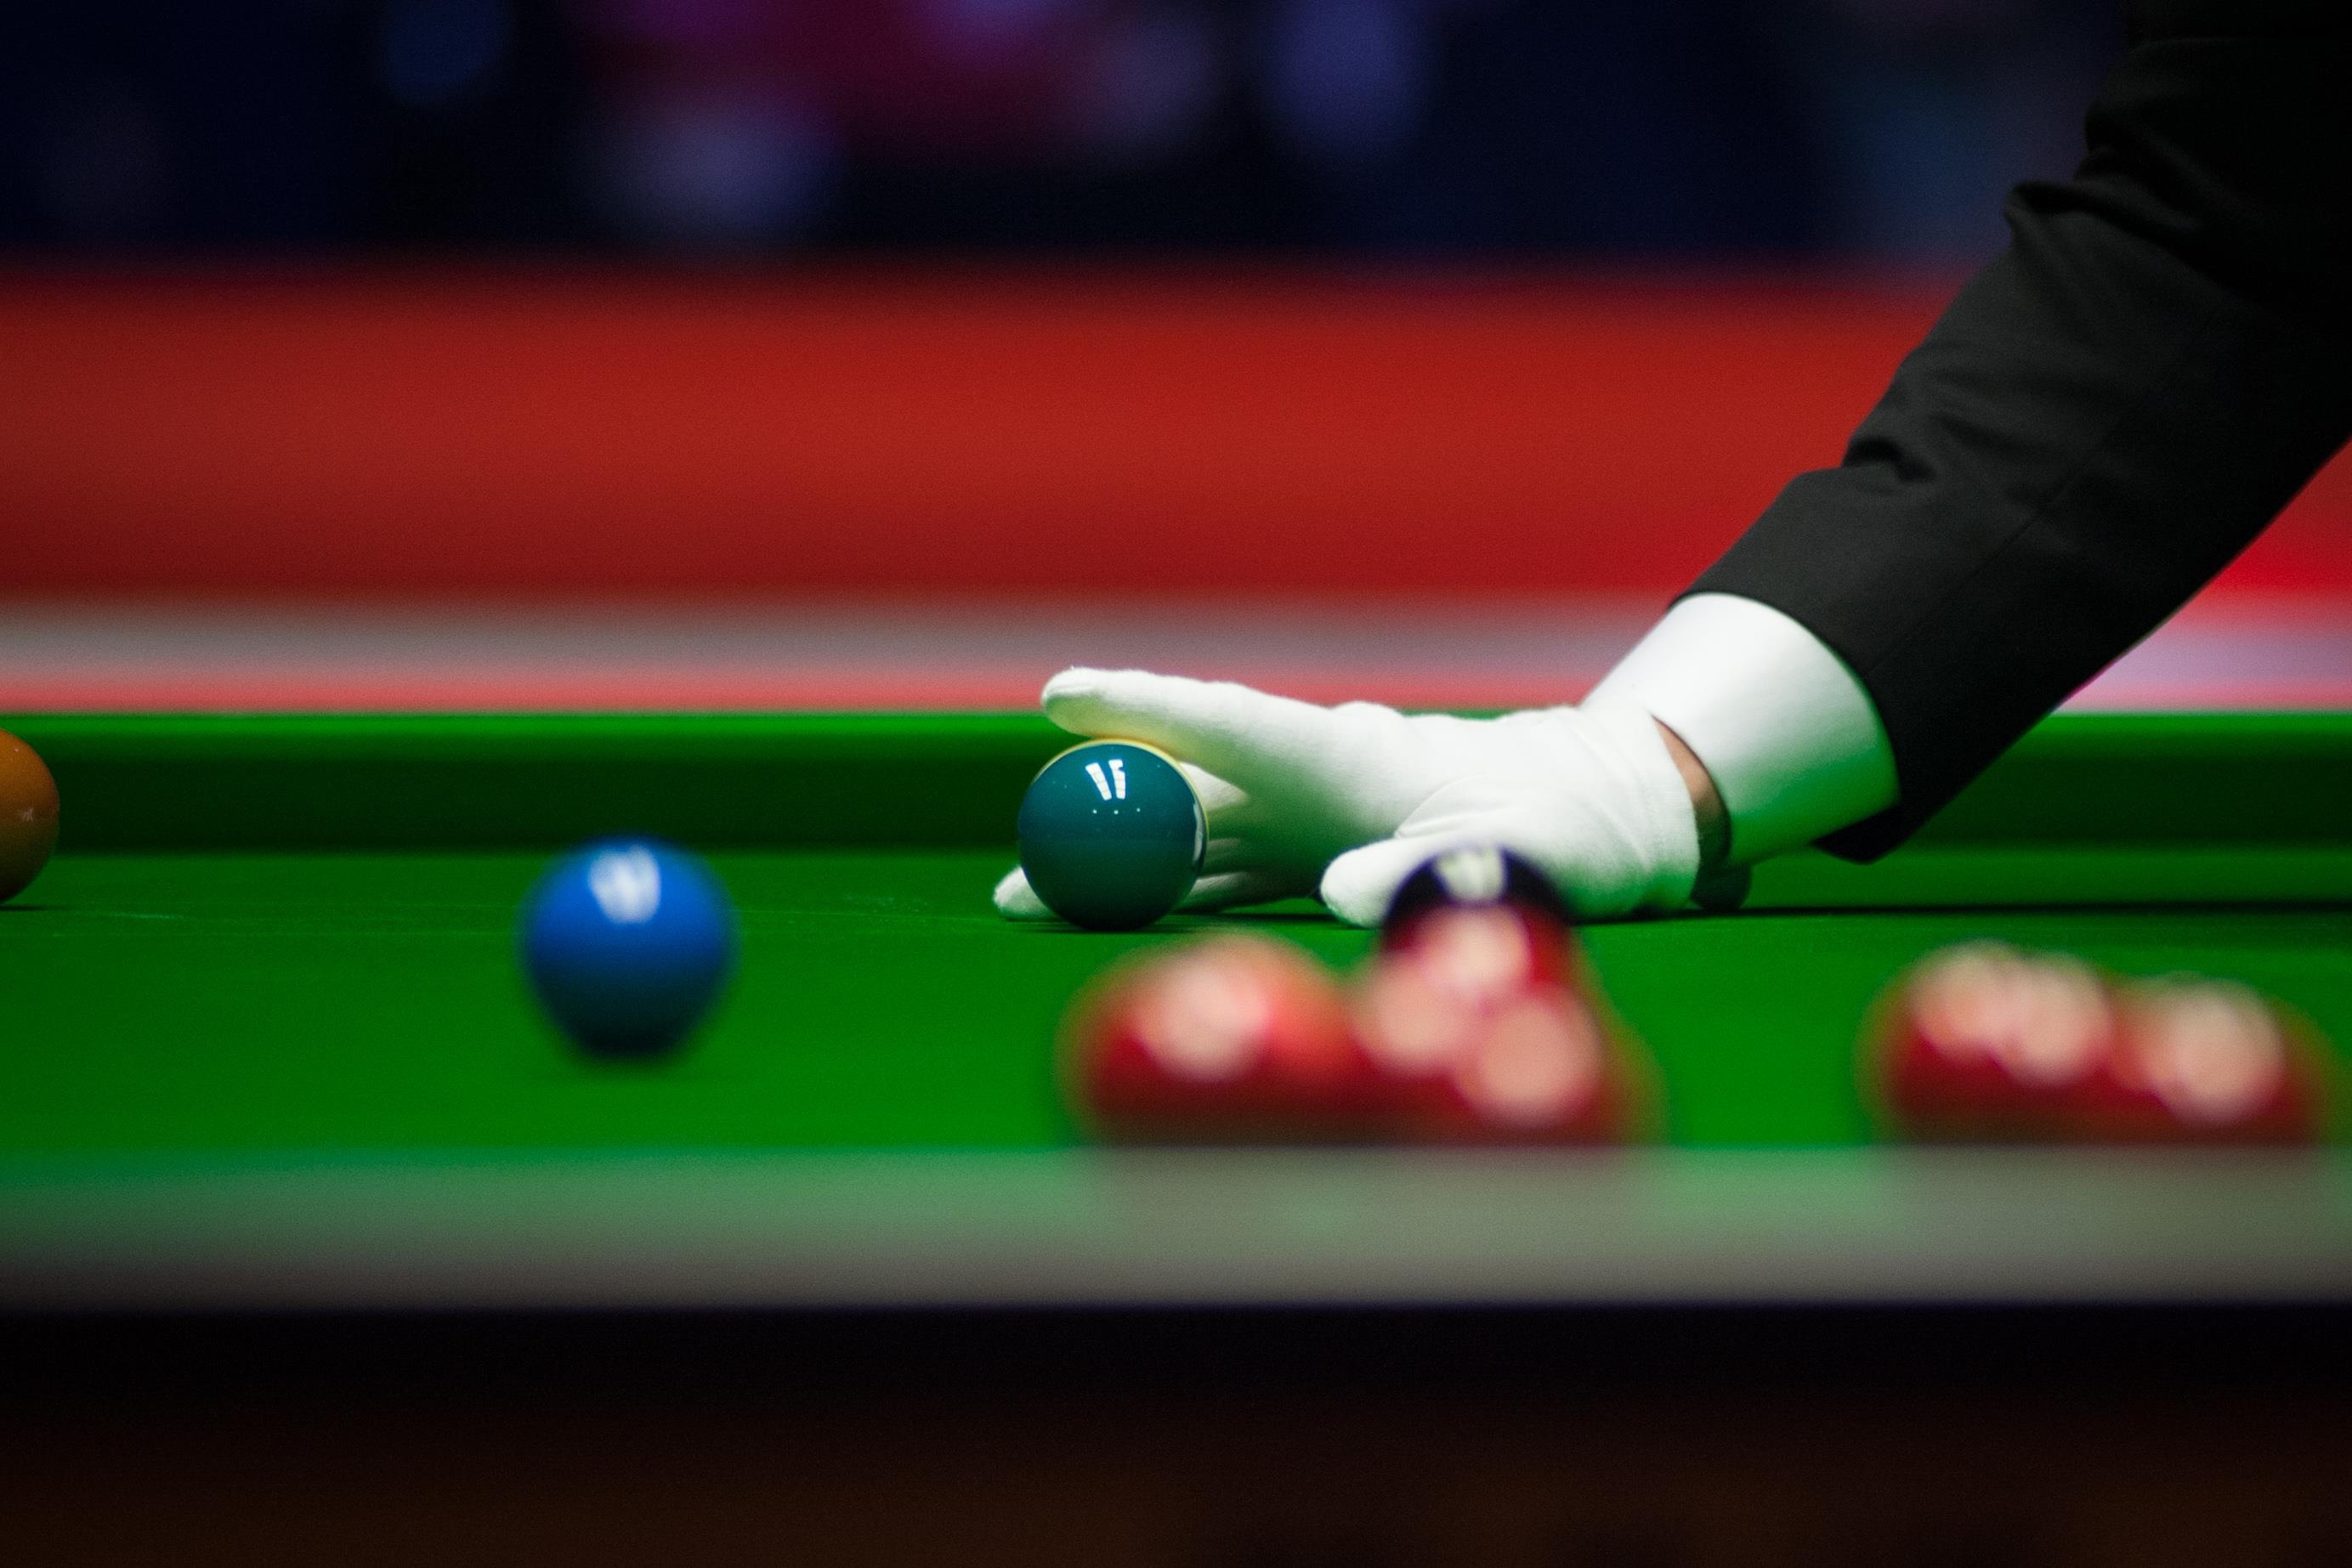 Cue Sports: Professional snooker and English billiards, The World Professional Billiards and Snooker Association. 2770x1850 HD Background.